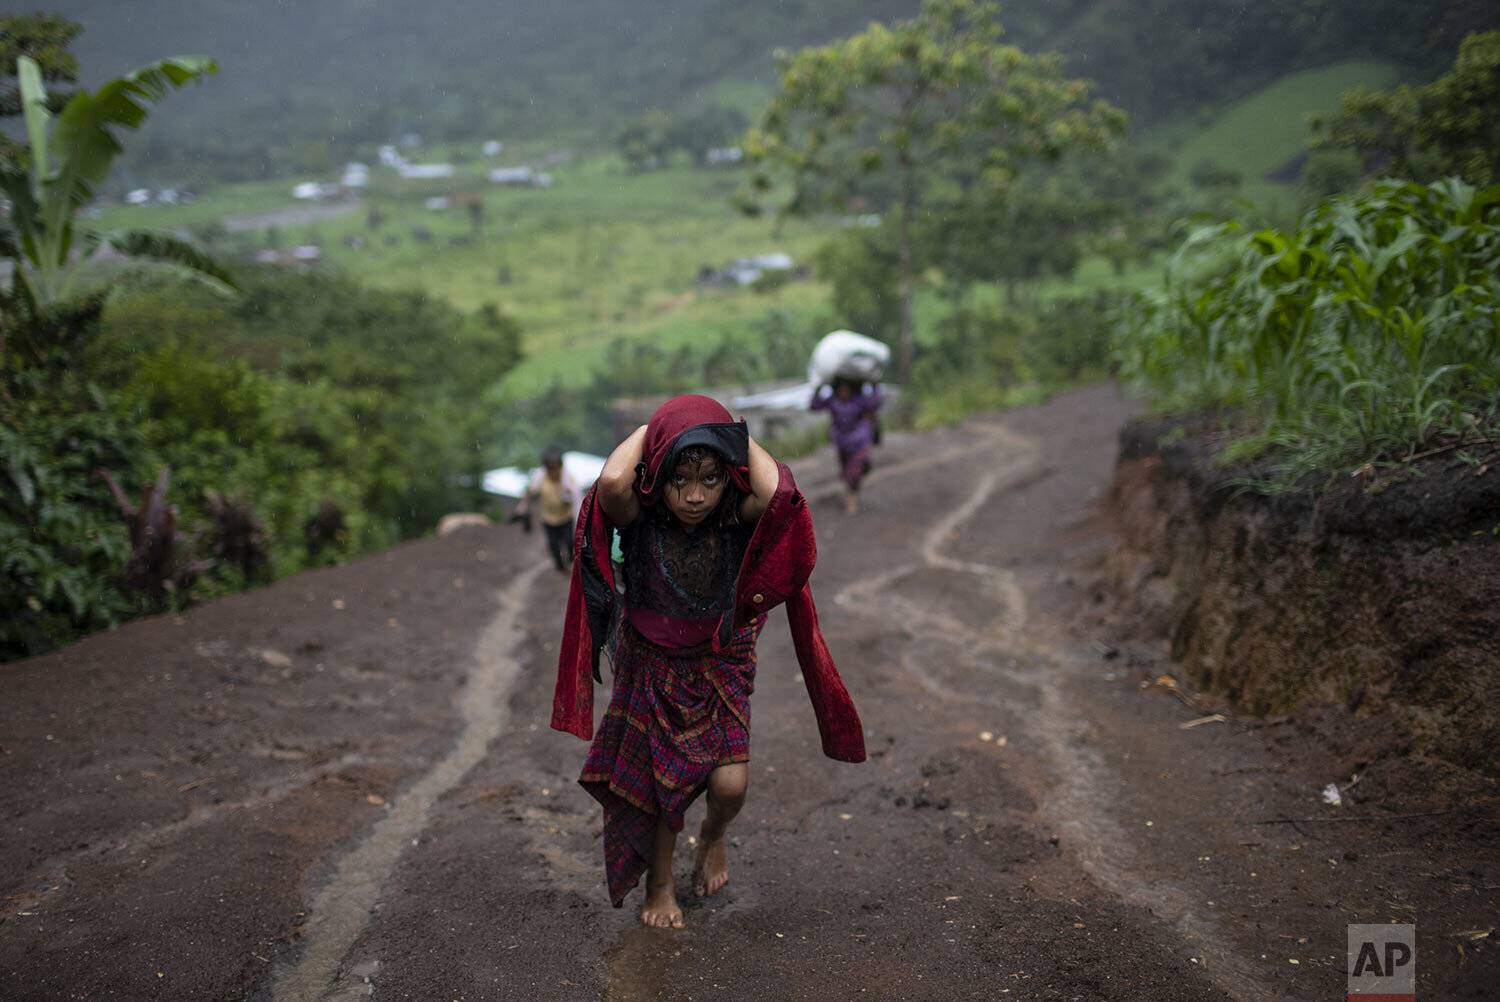  After a heavy rain, a girl hauls wood for cooking, in the makeshift settlement Nuevo Queja, Guatemala, July 5, 2021. The survivors of a mudslide triggered by Hurricane Eta, burying their Guatemalan town Queja in Nov. 2020, are destitute and displace